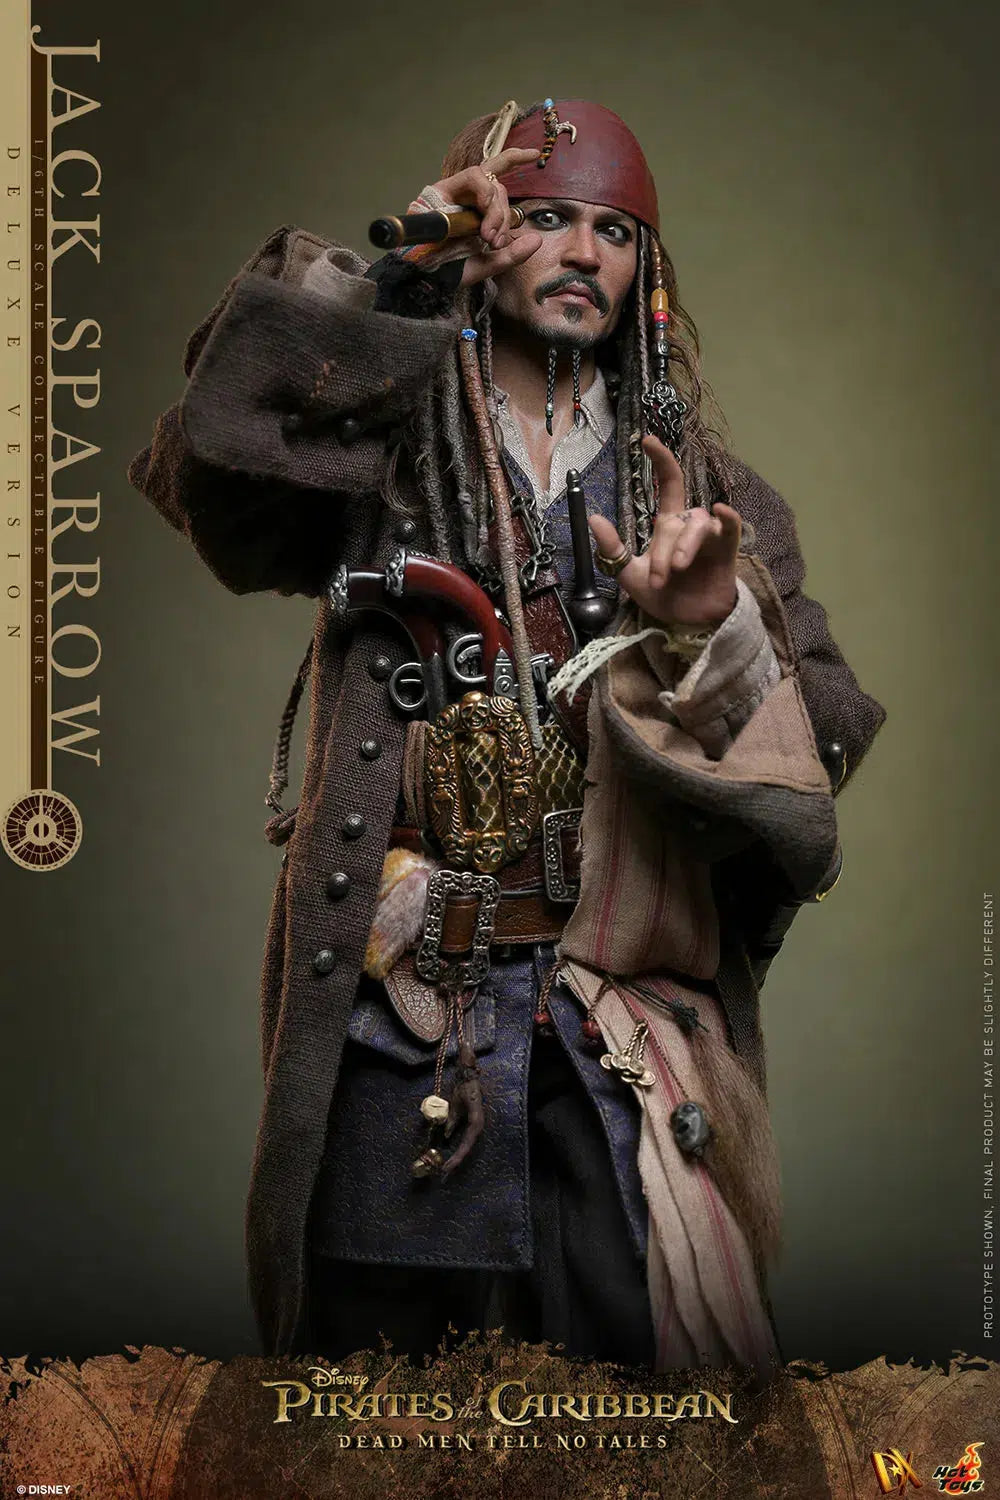 Jack Sparrow: Pirates Of The Caribbean: Dead Men Tell No Tales: Deluxe: Sixth Scale: DX38: Hot Toys